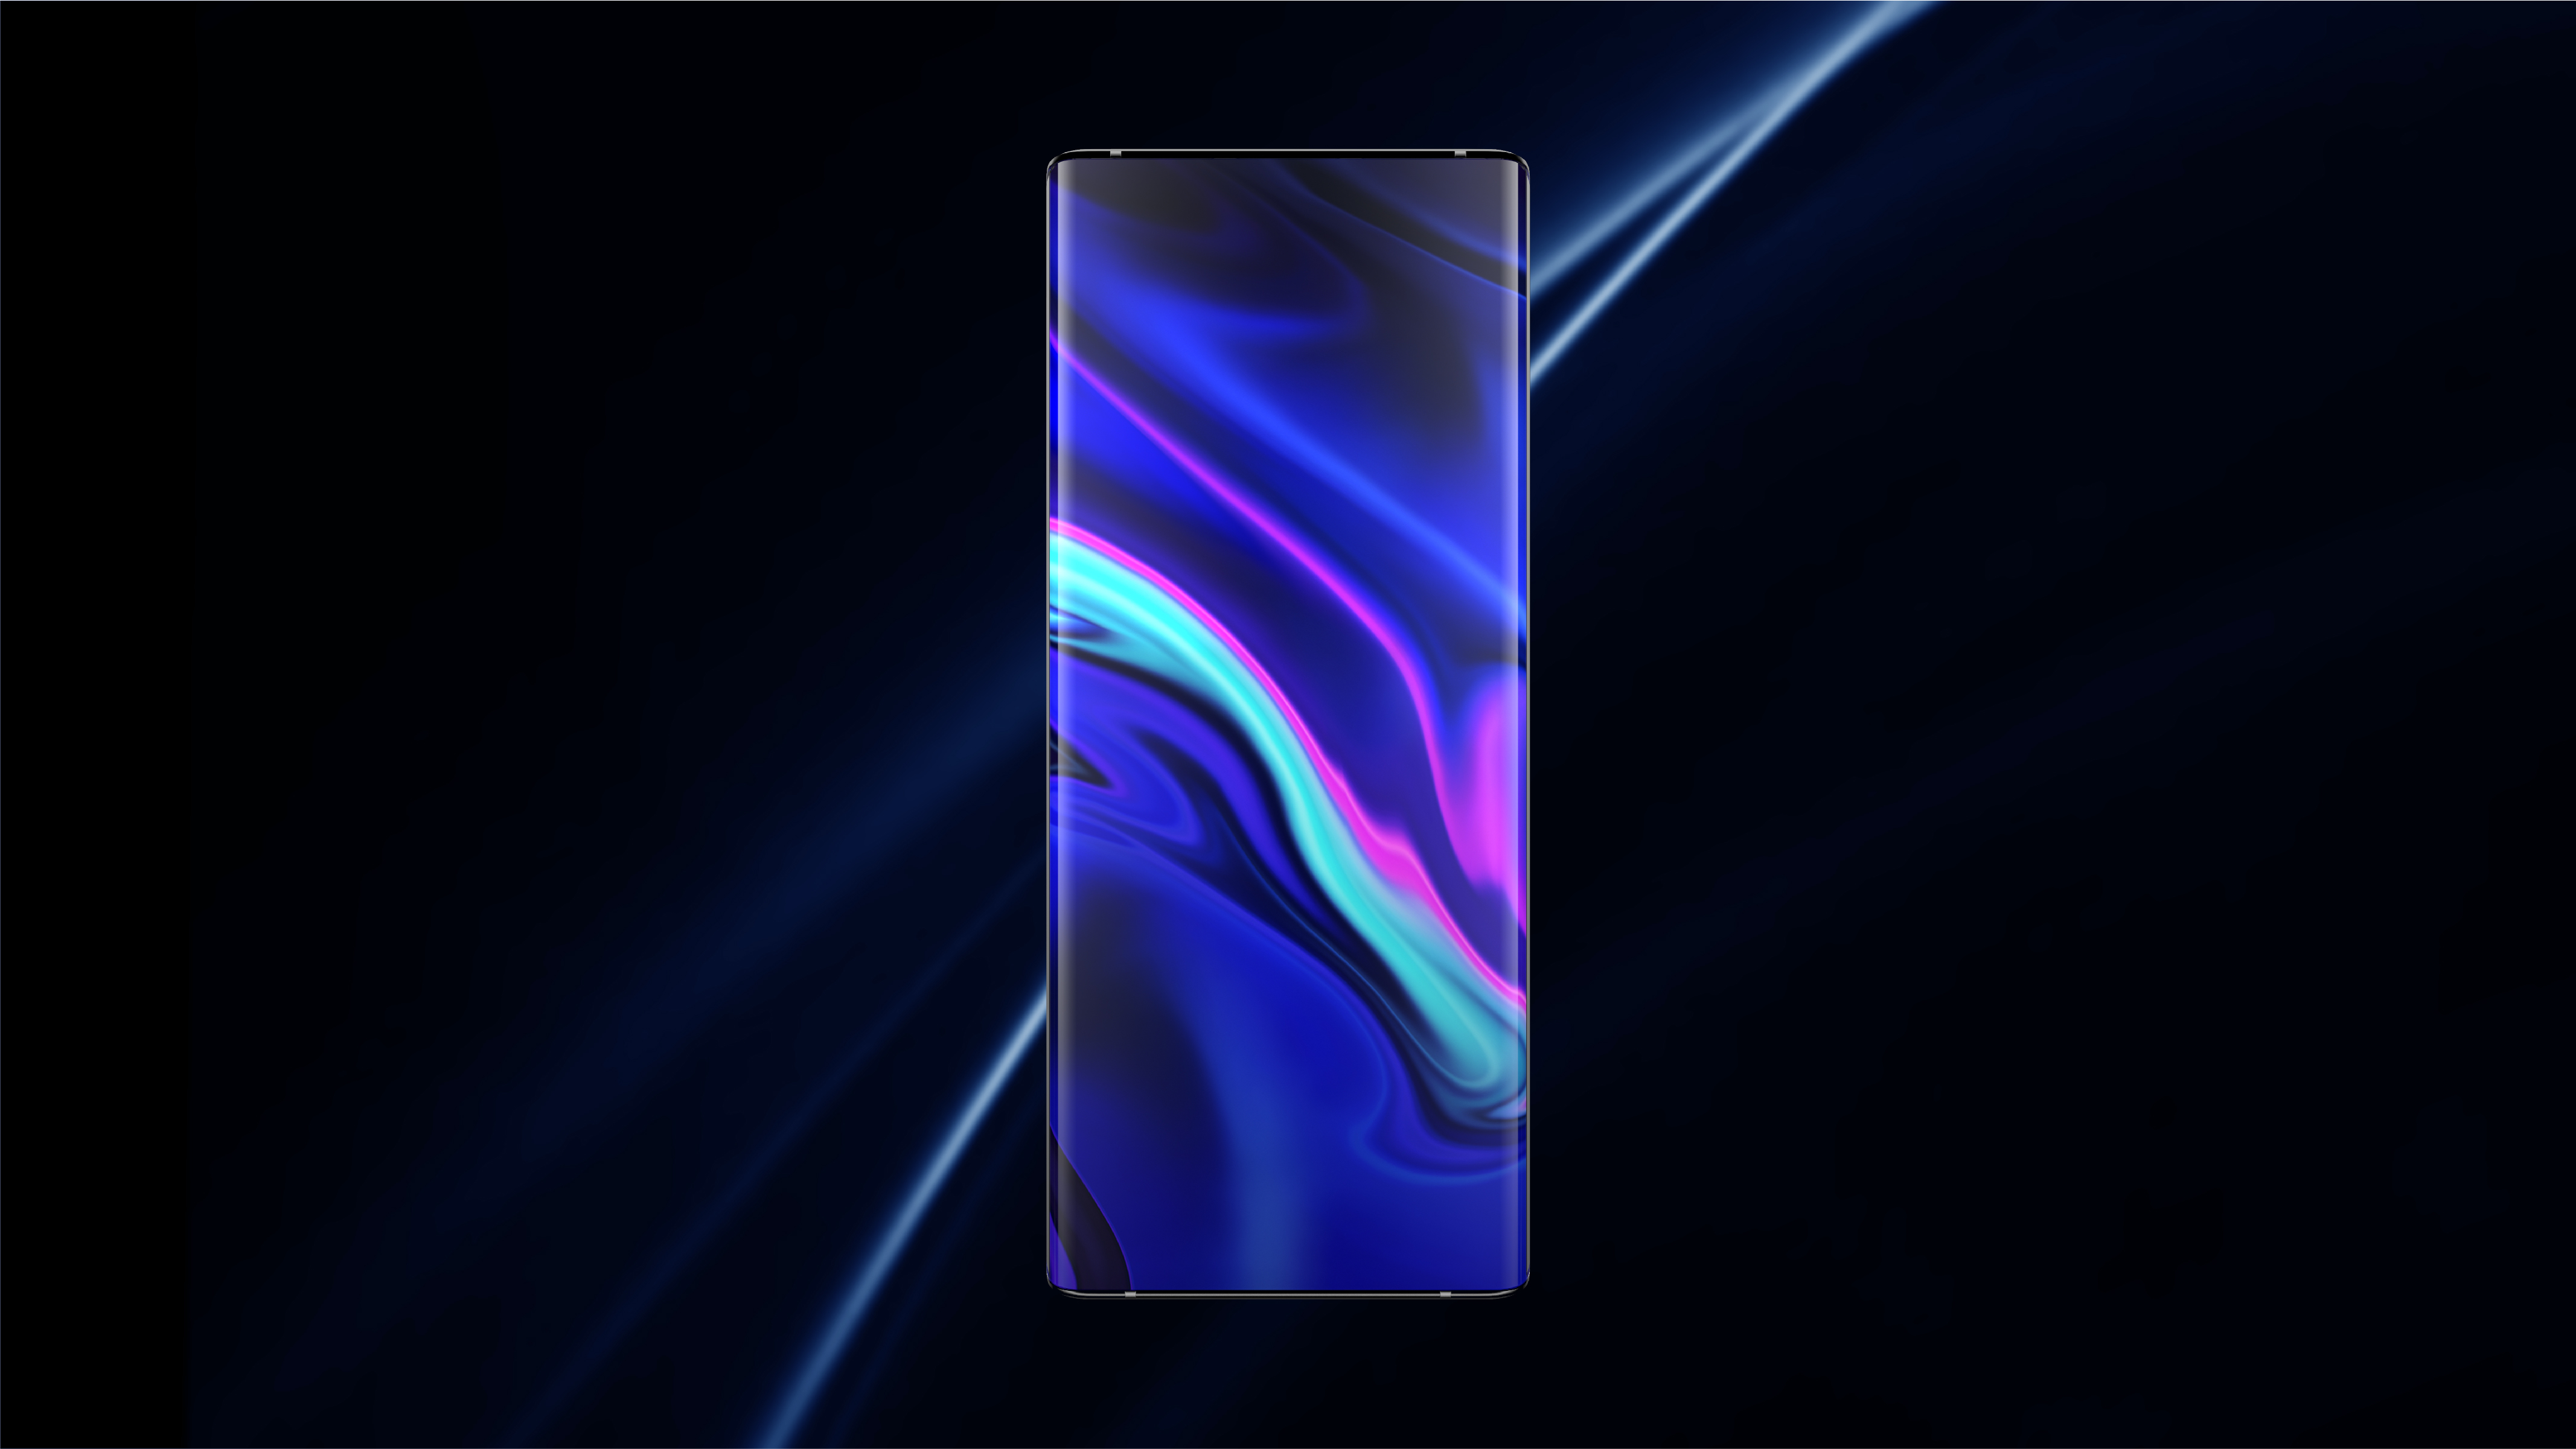 Vivo’s new Apex zero-port concept phone packs in-display selfie lens and 60W wireless charging